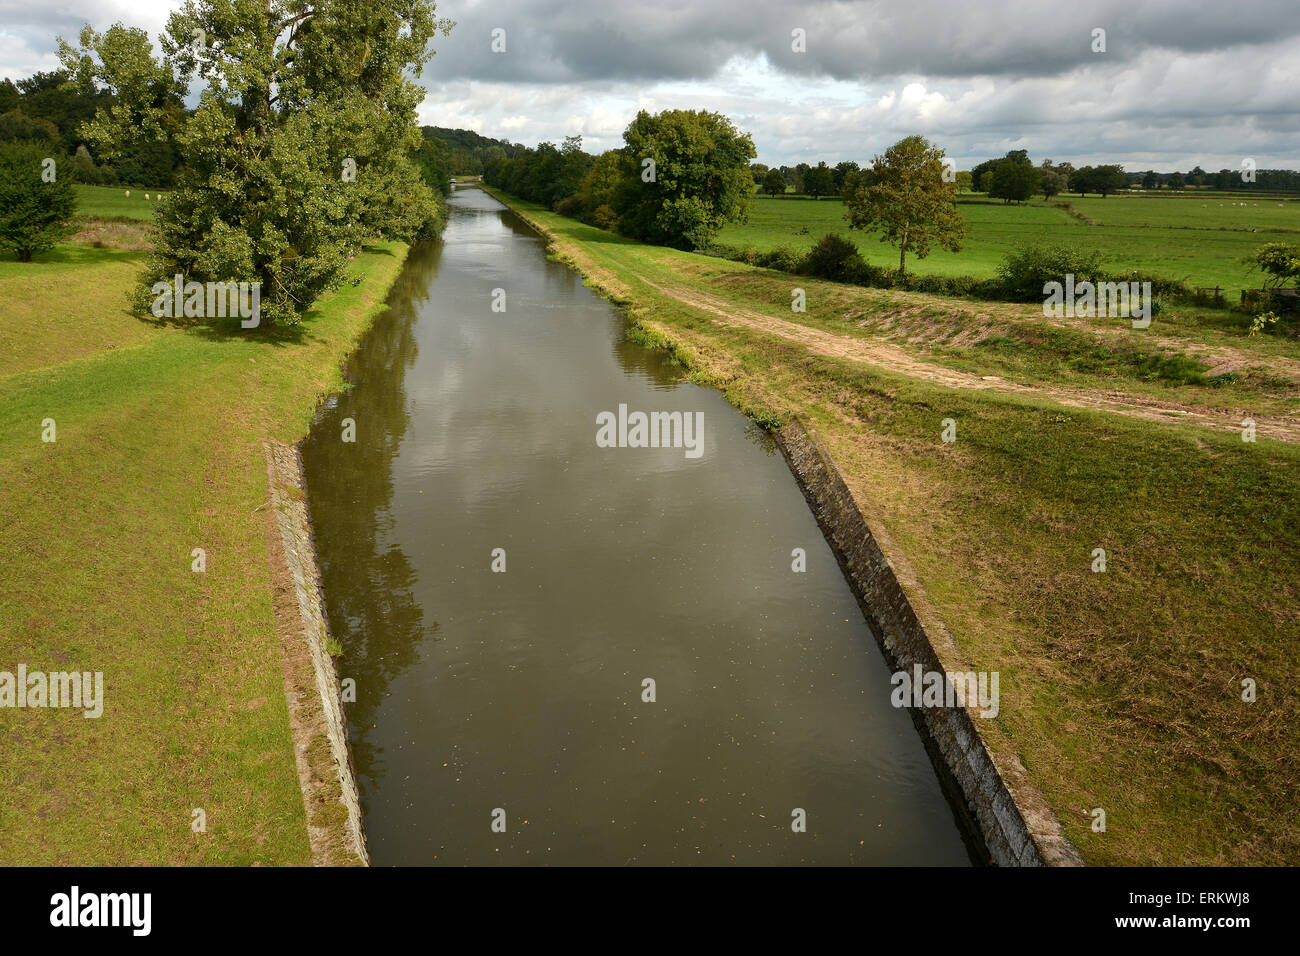 Digoin canal, Chambilly, Saone et Loire, Burgundy, France, Europe Stock Photo